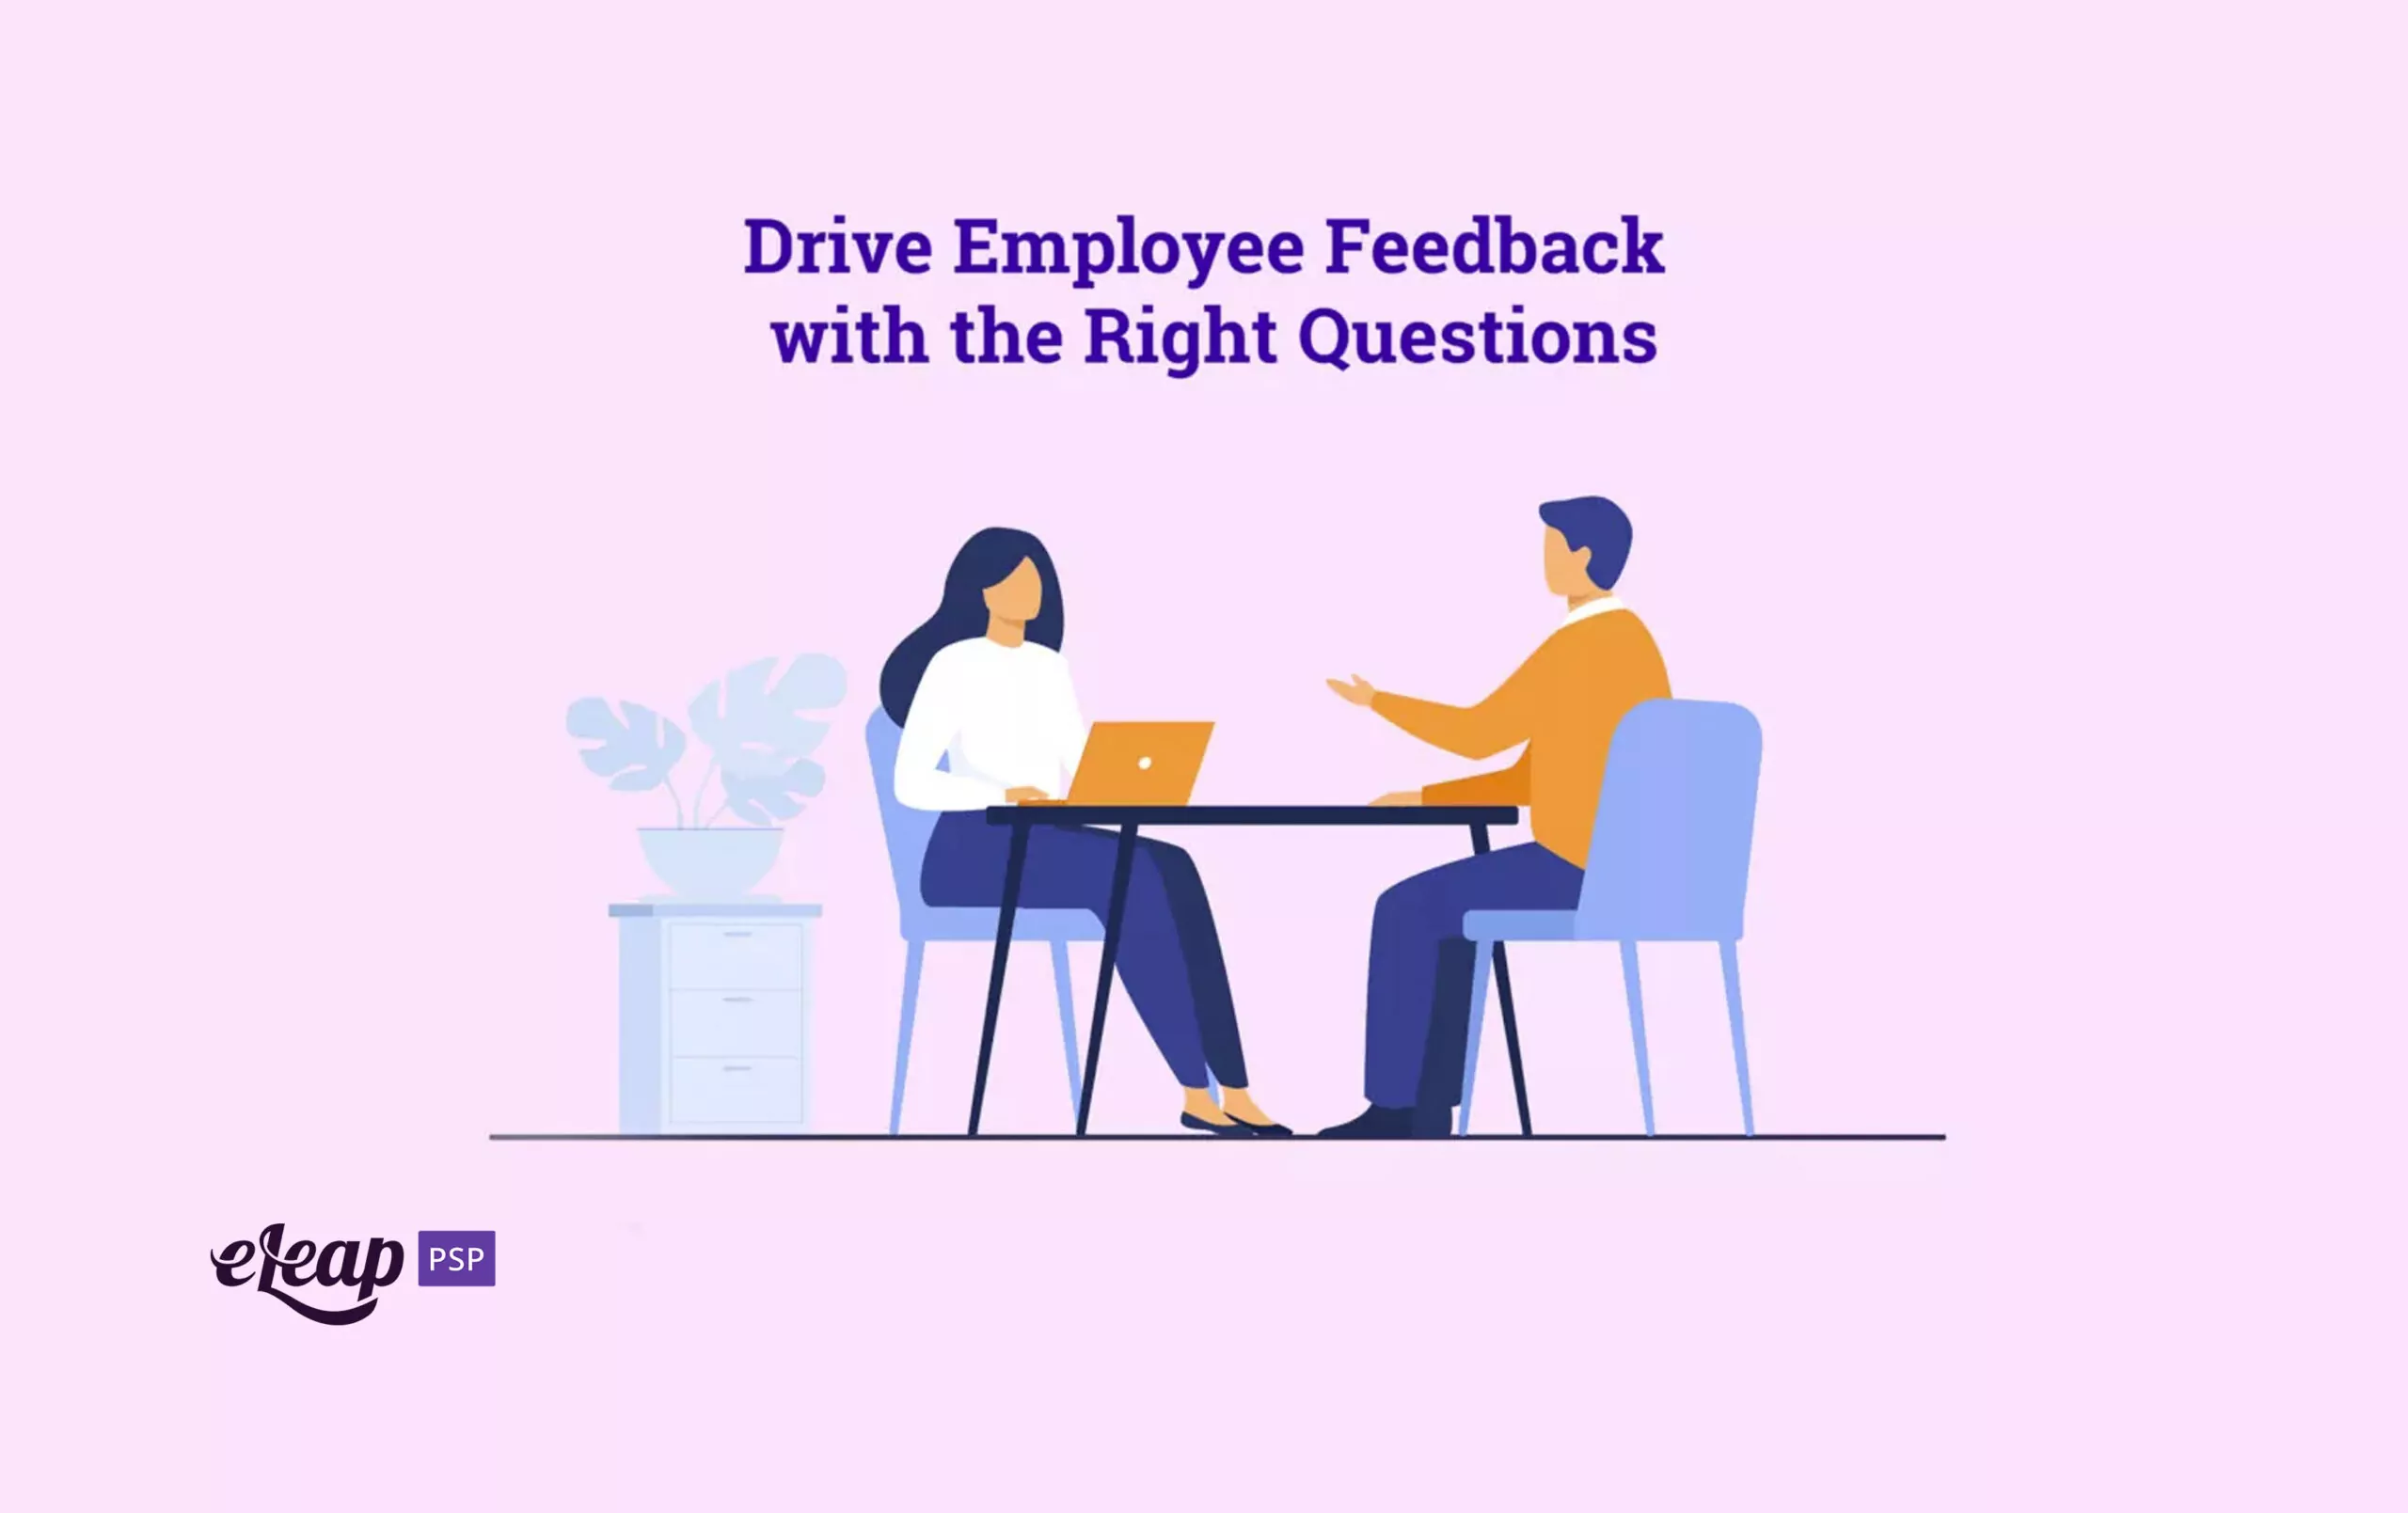 Drive Employee Feedback with the Right Questions